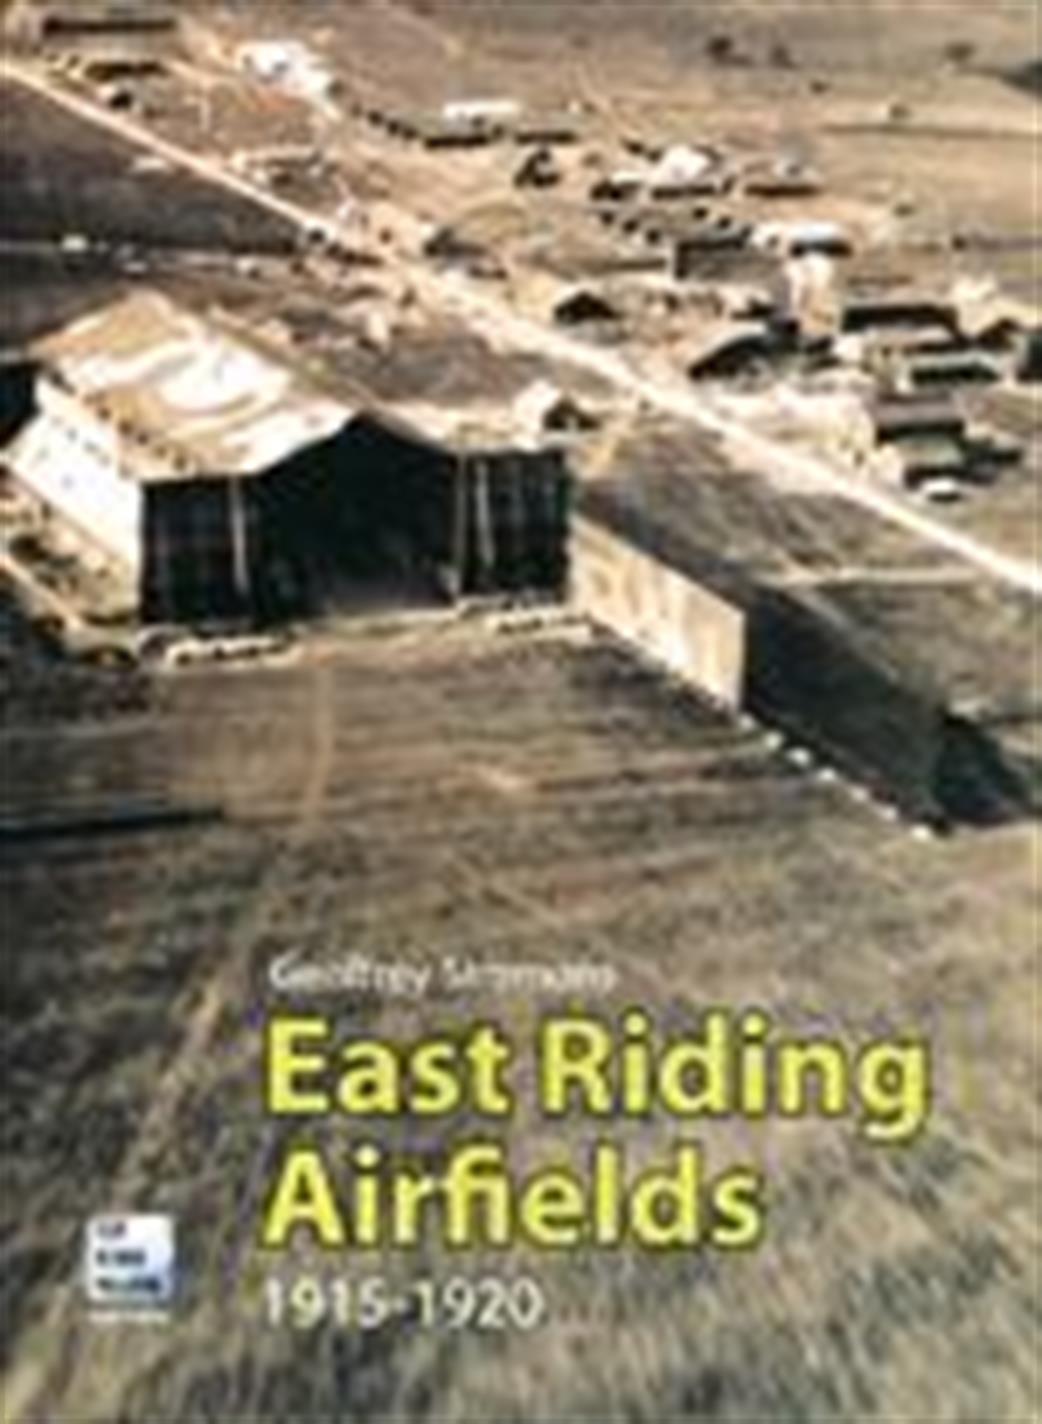 9780954560591 East Riding Airfields by Geoffrey Simmons